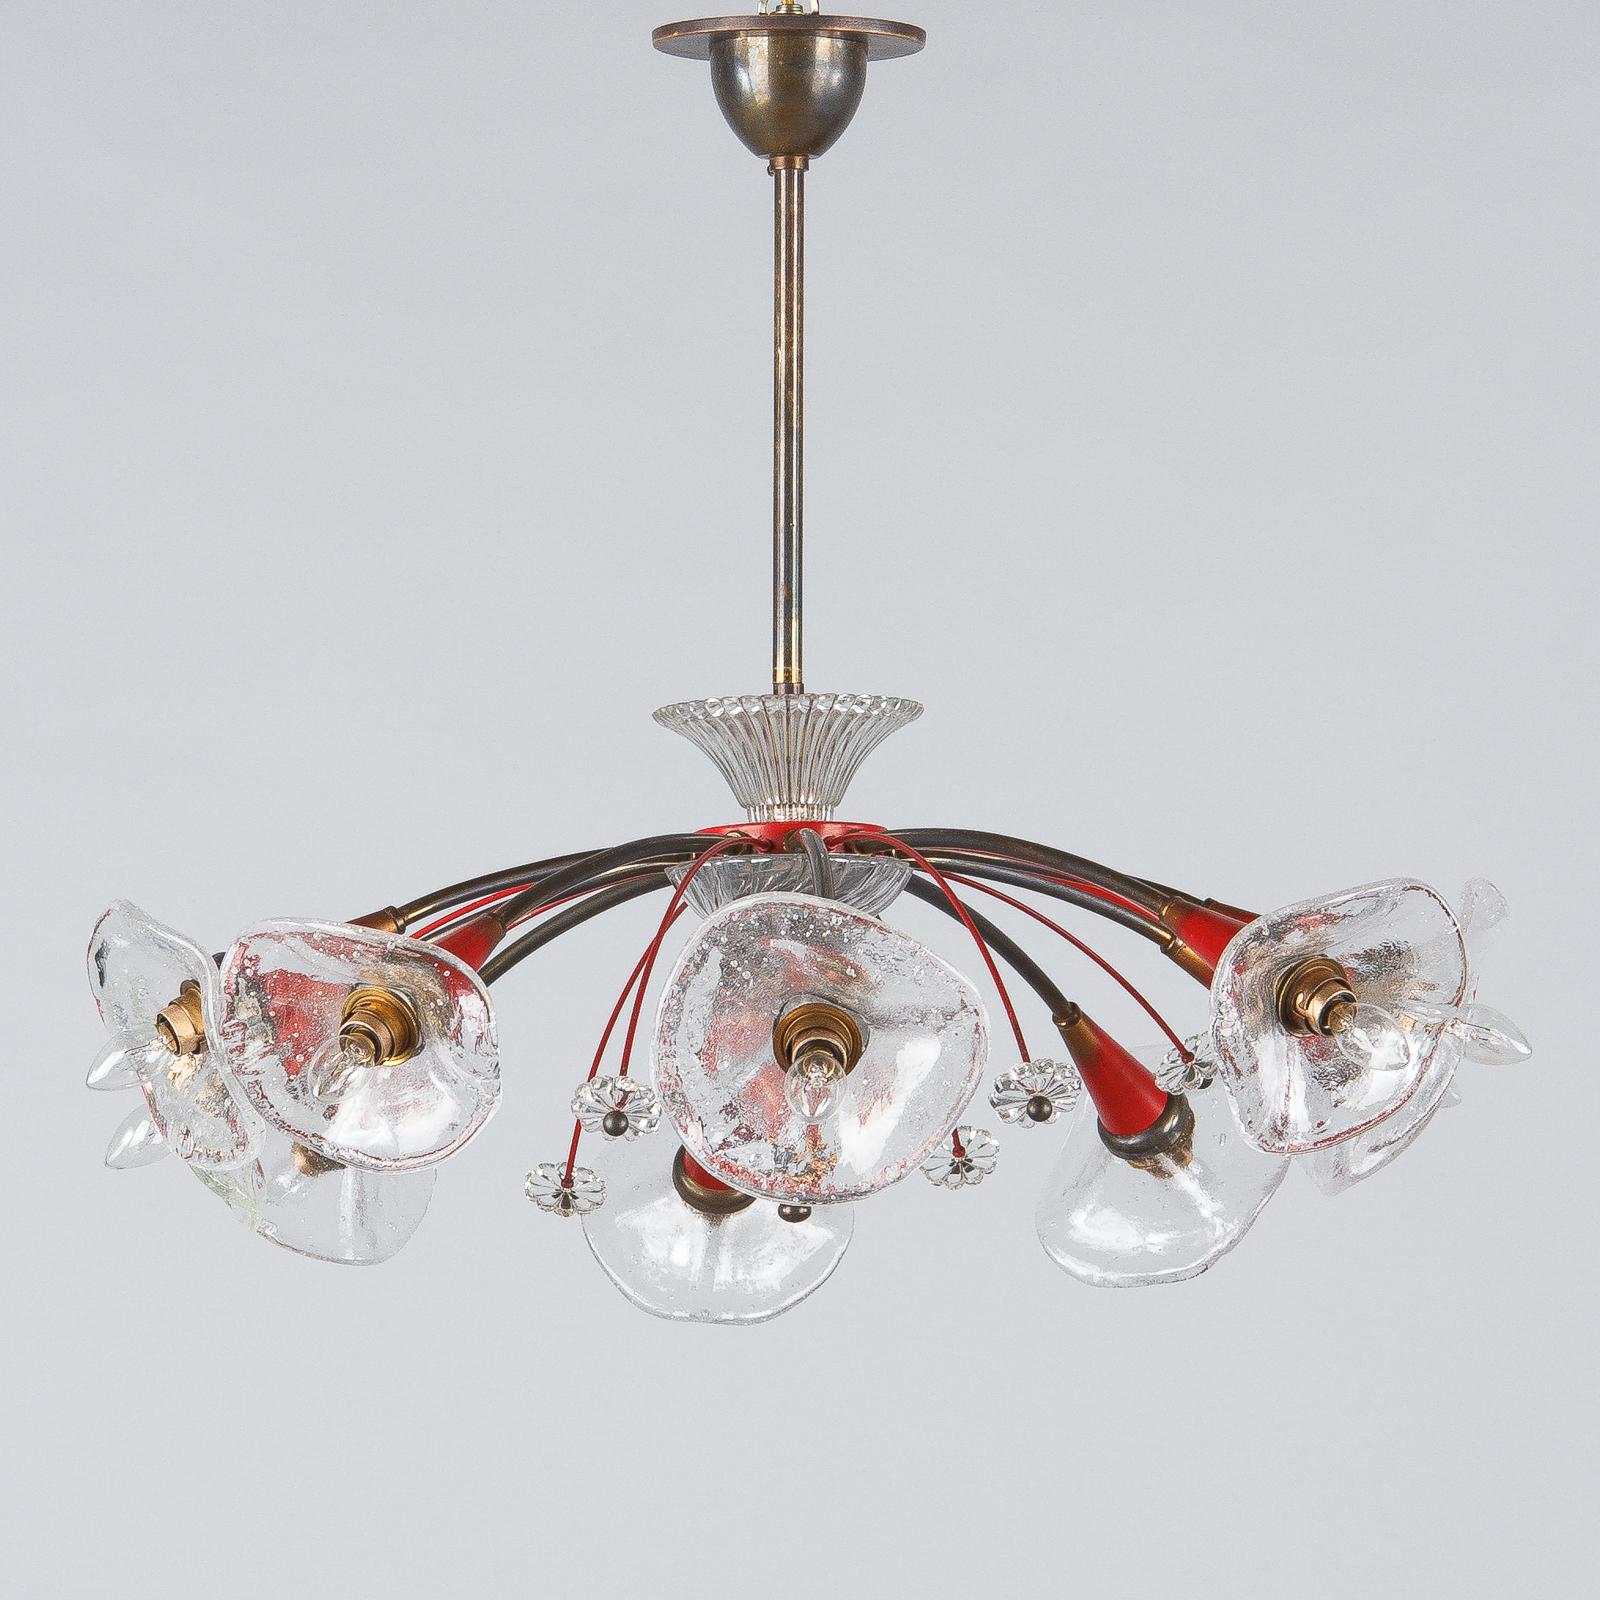 Mid-Century Modern French Midcentury Red Metal 10-Light Chandelier by Lunel